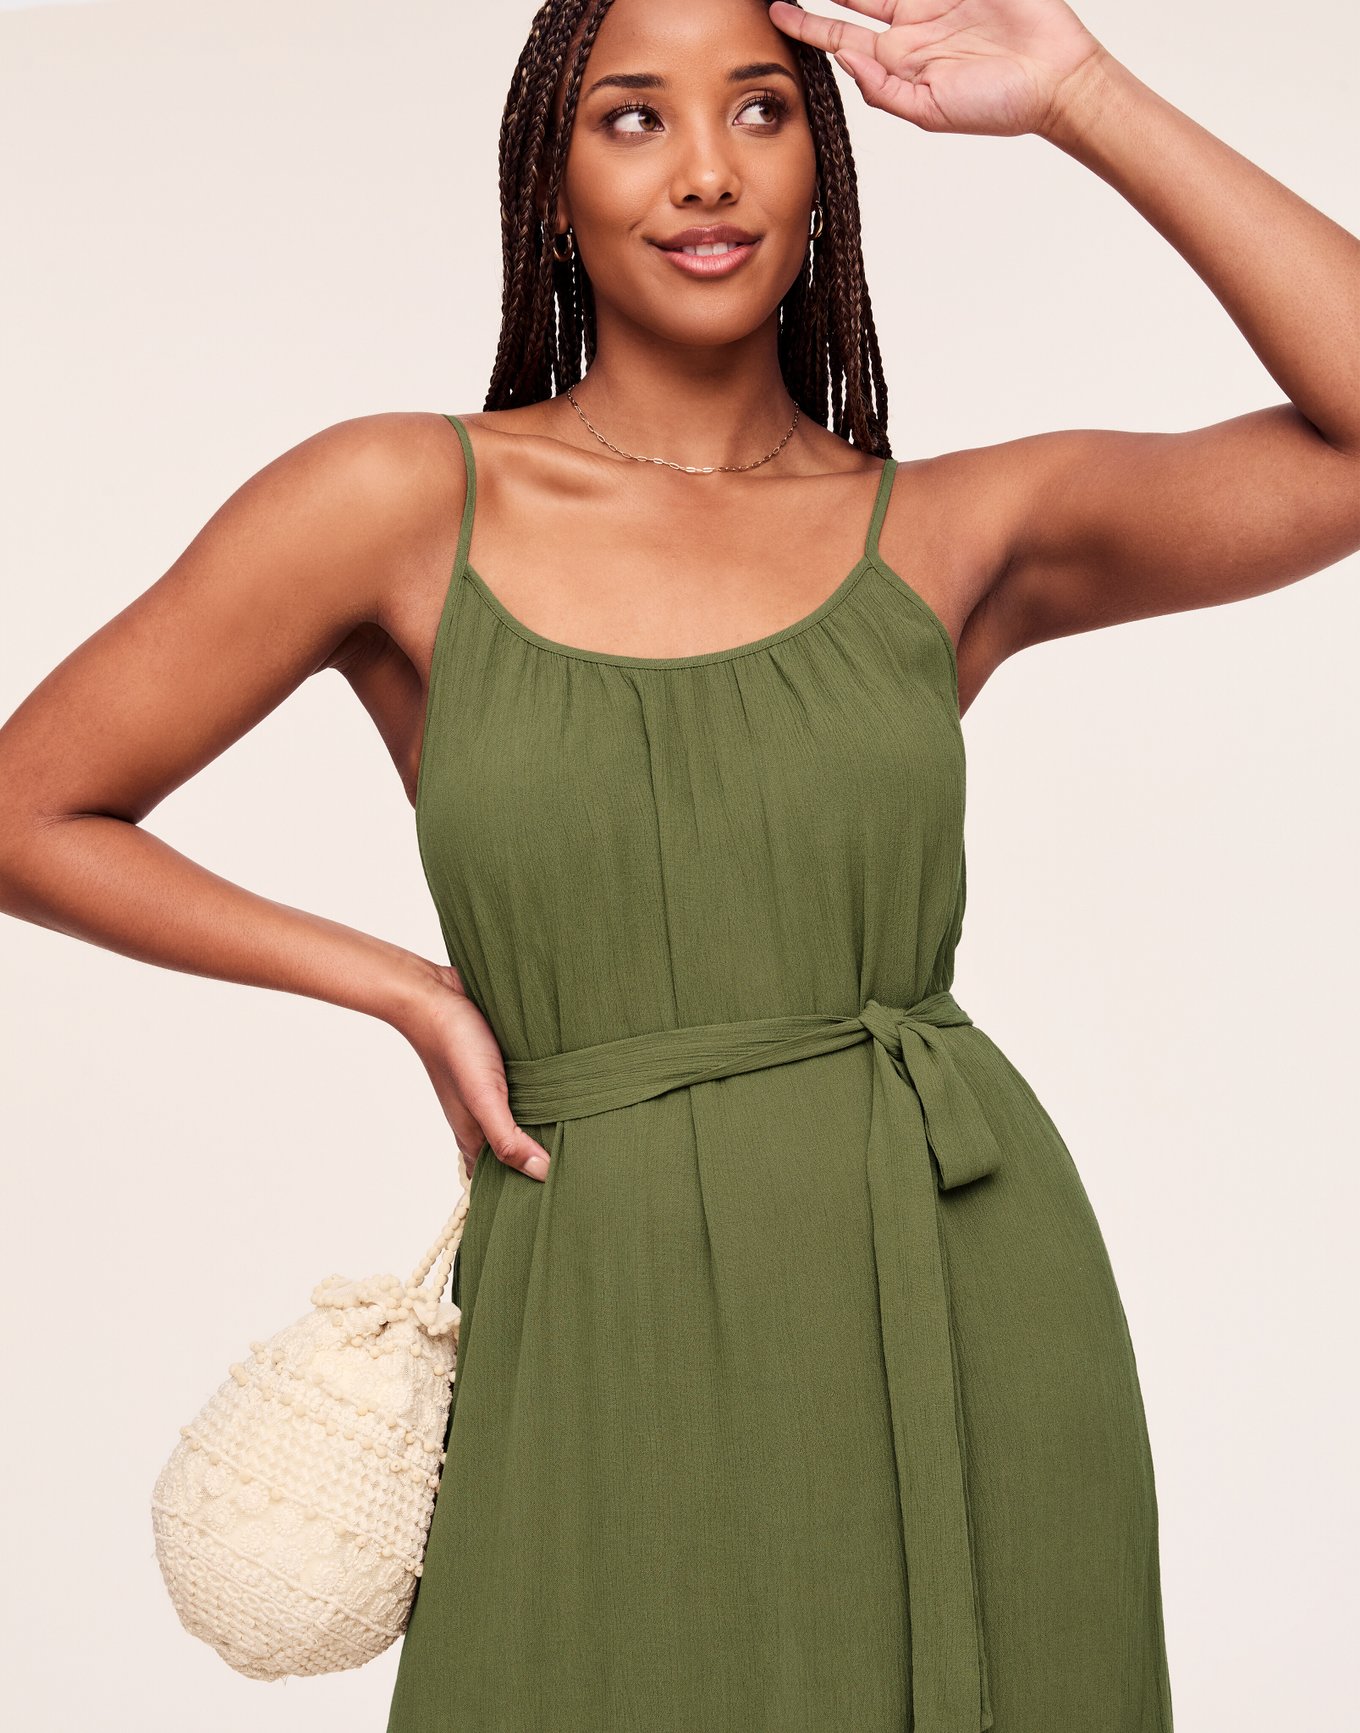 Buy THE CLOTHING FACTORY A Line Dress with Tie Up Olive Green Color Dress  for Women at Amazon.in